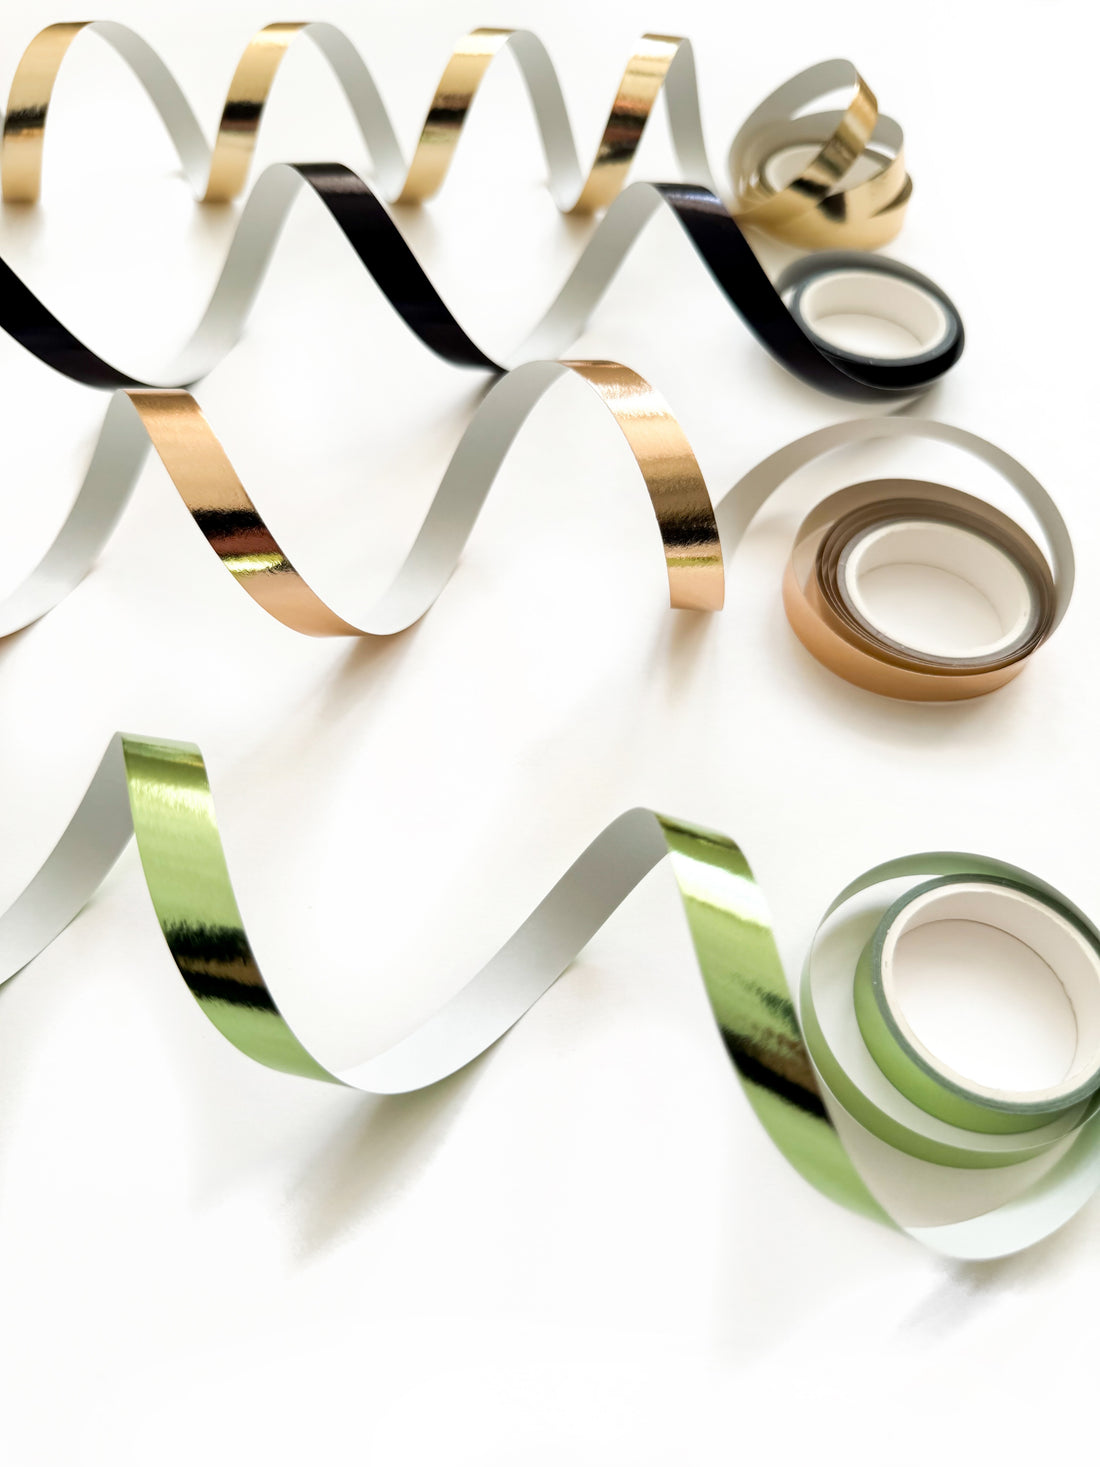 Gold, black, rose gold and green washi tape rolls